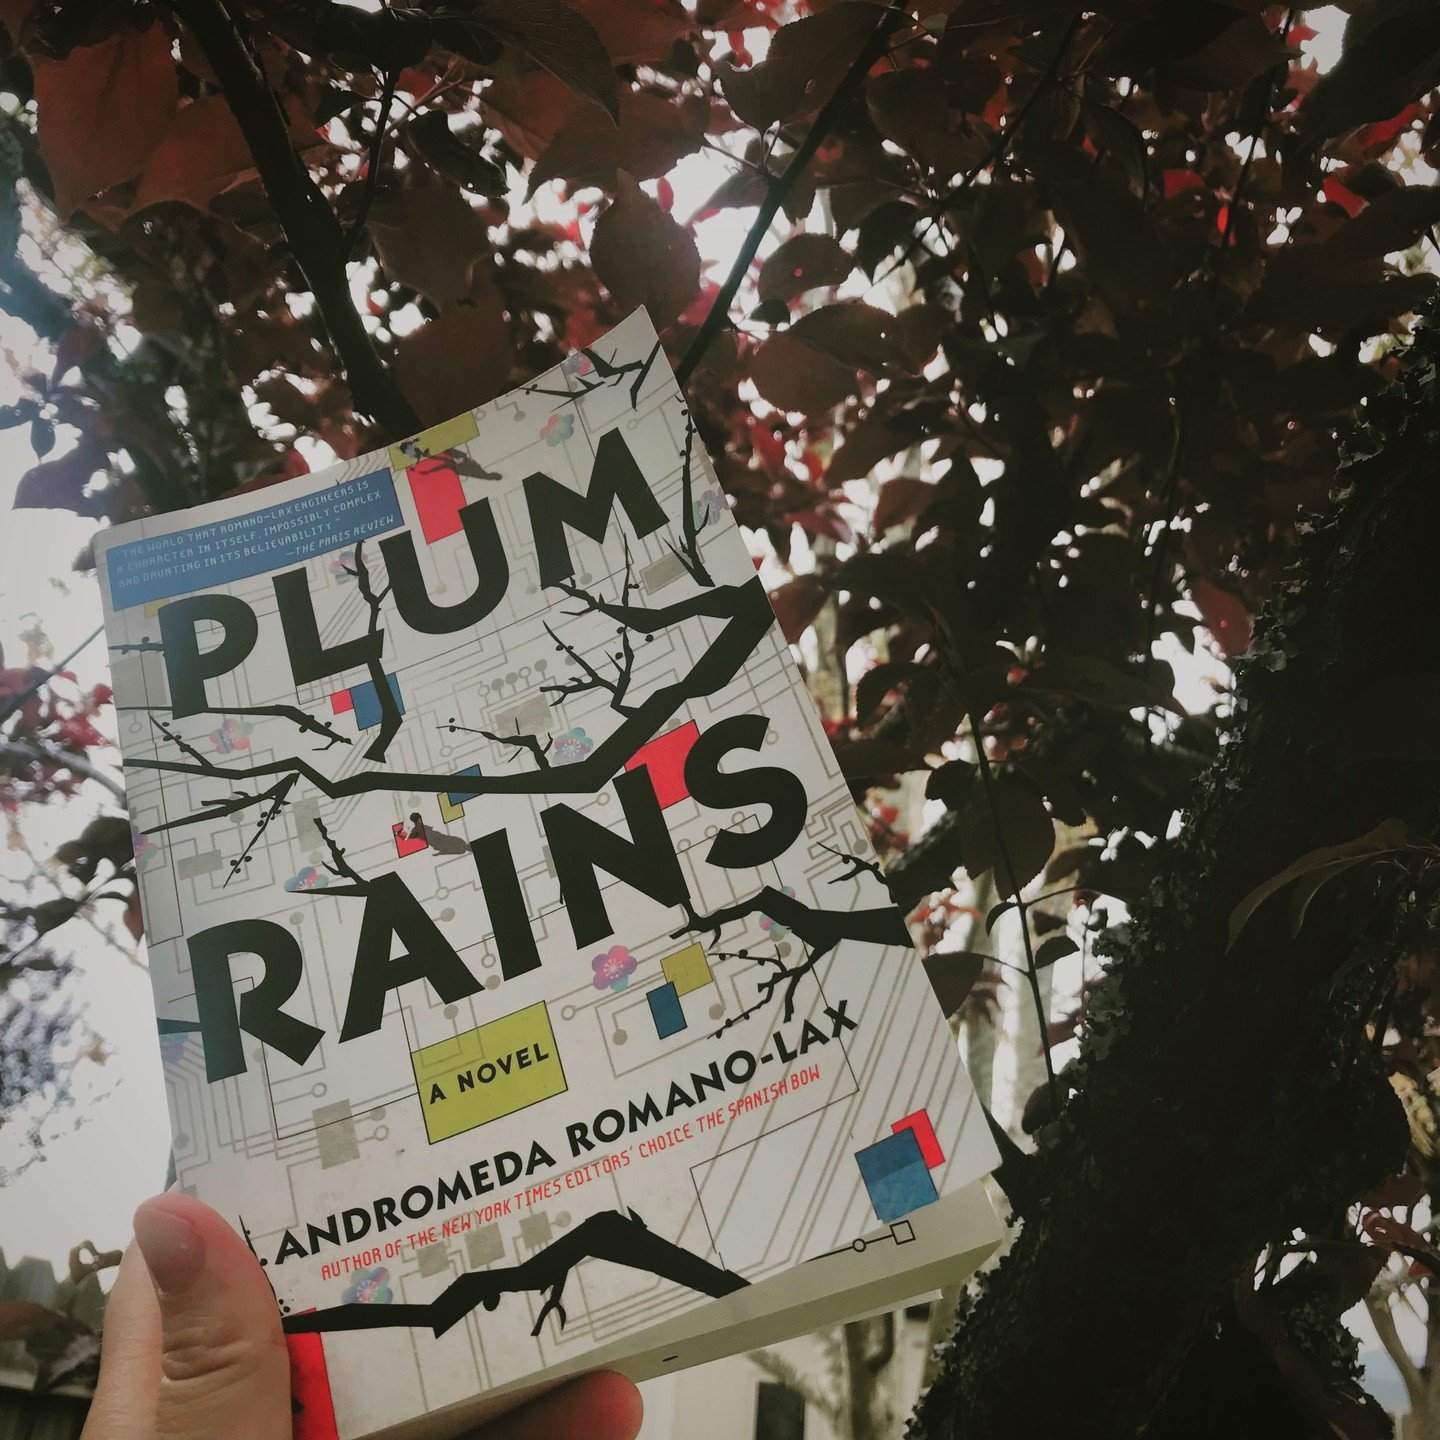 I'd fallen a bit behind in my reading goals over the last two months. I've been looking for the right book to help pull me out of this little reading slump. This one, Plum Rains by Andromeda Romano-Lax and another, that I'll probably finish in the ne